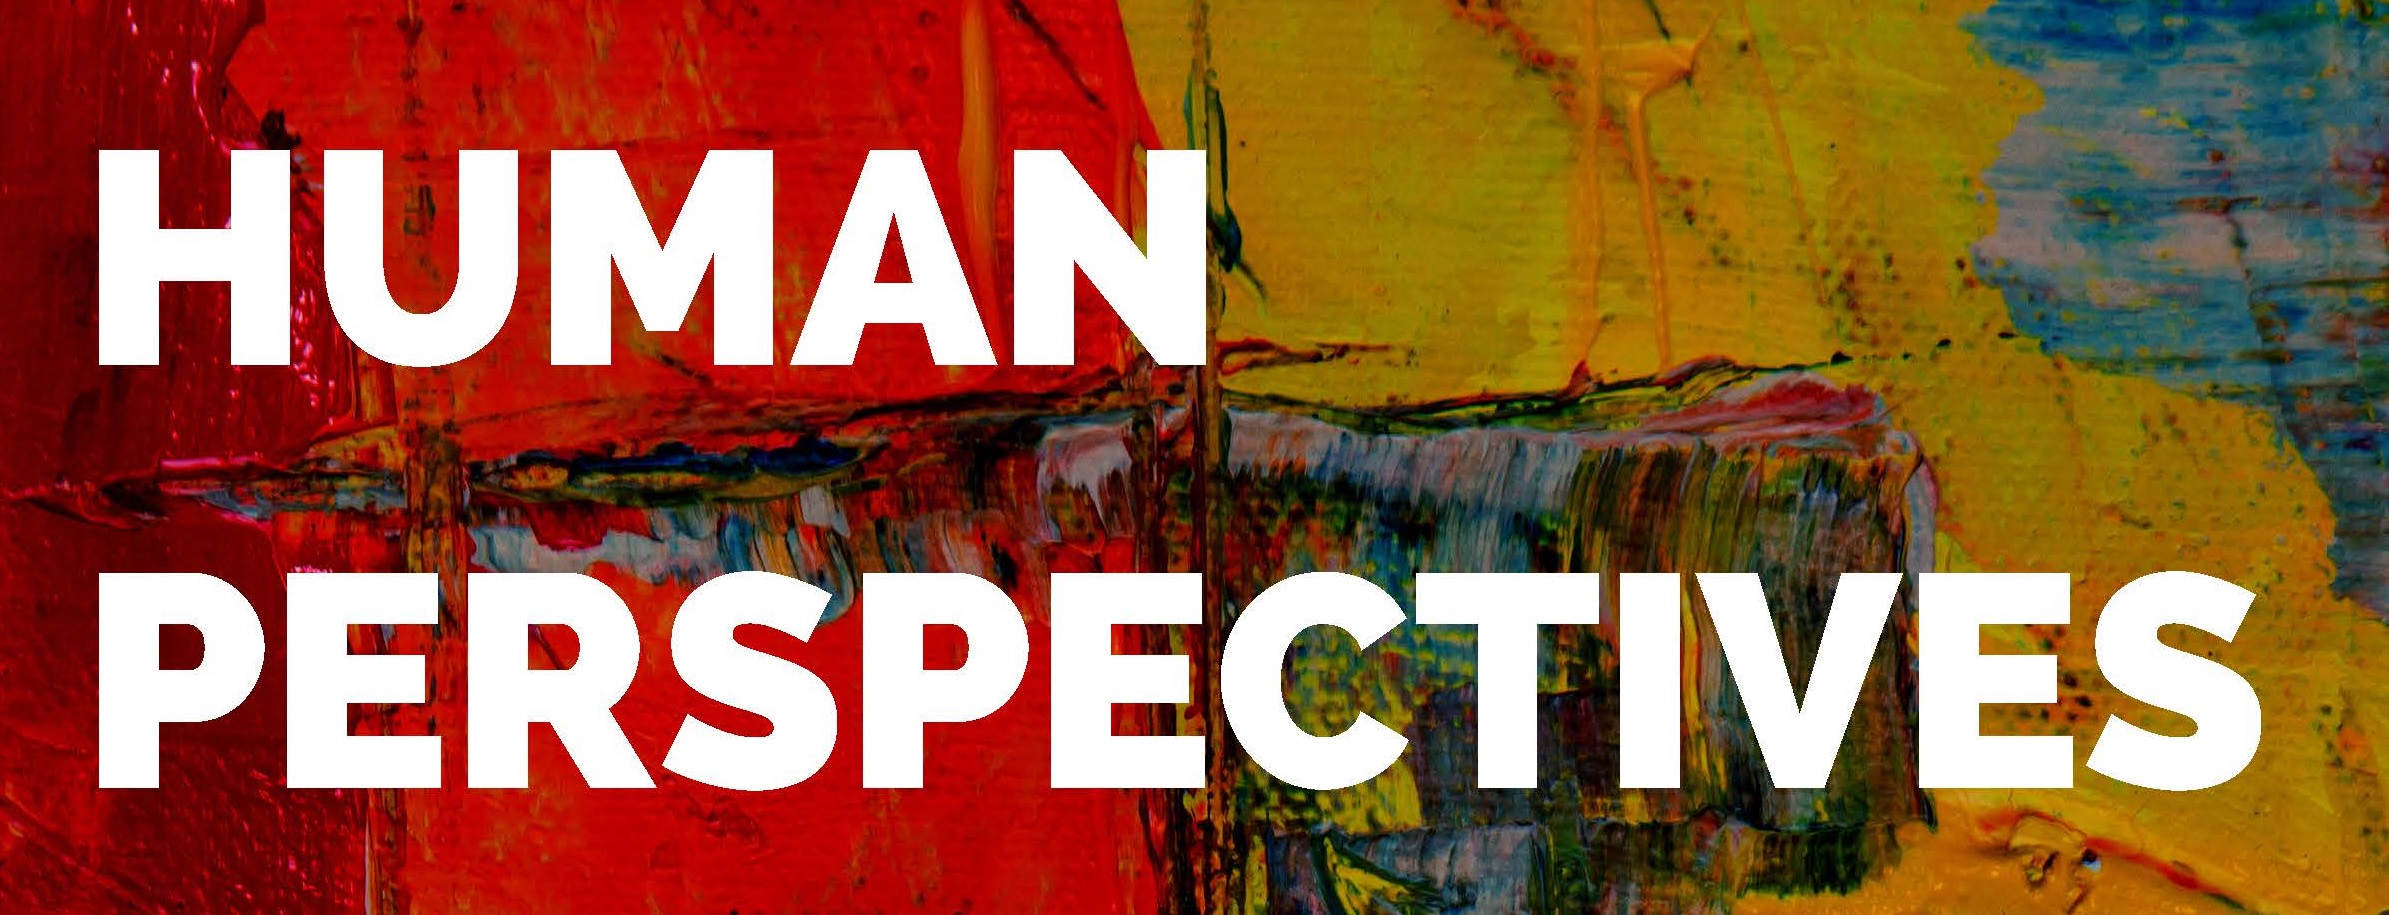 Human Perspectives title image